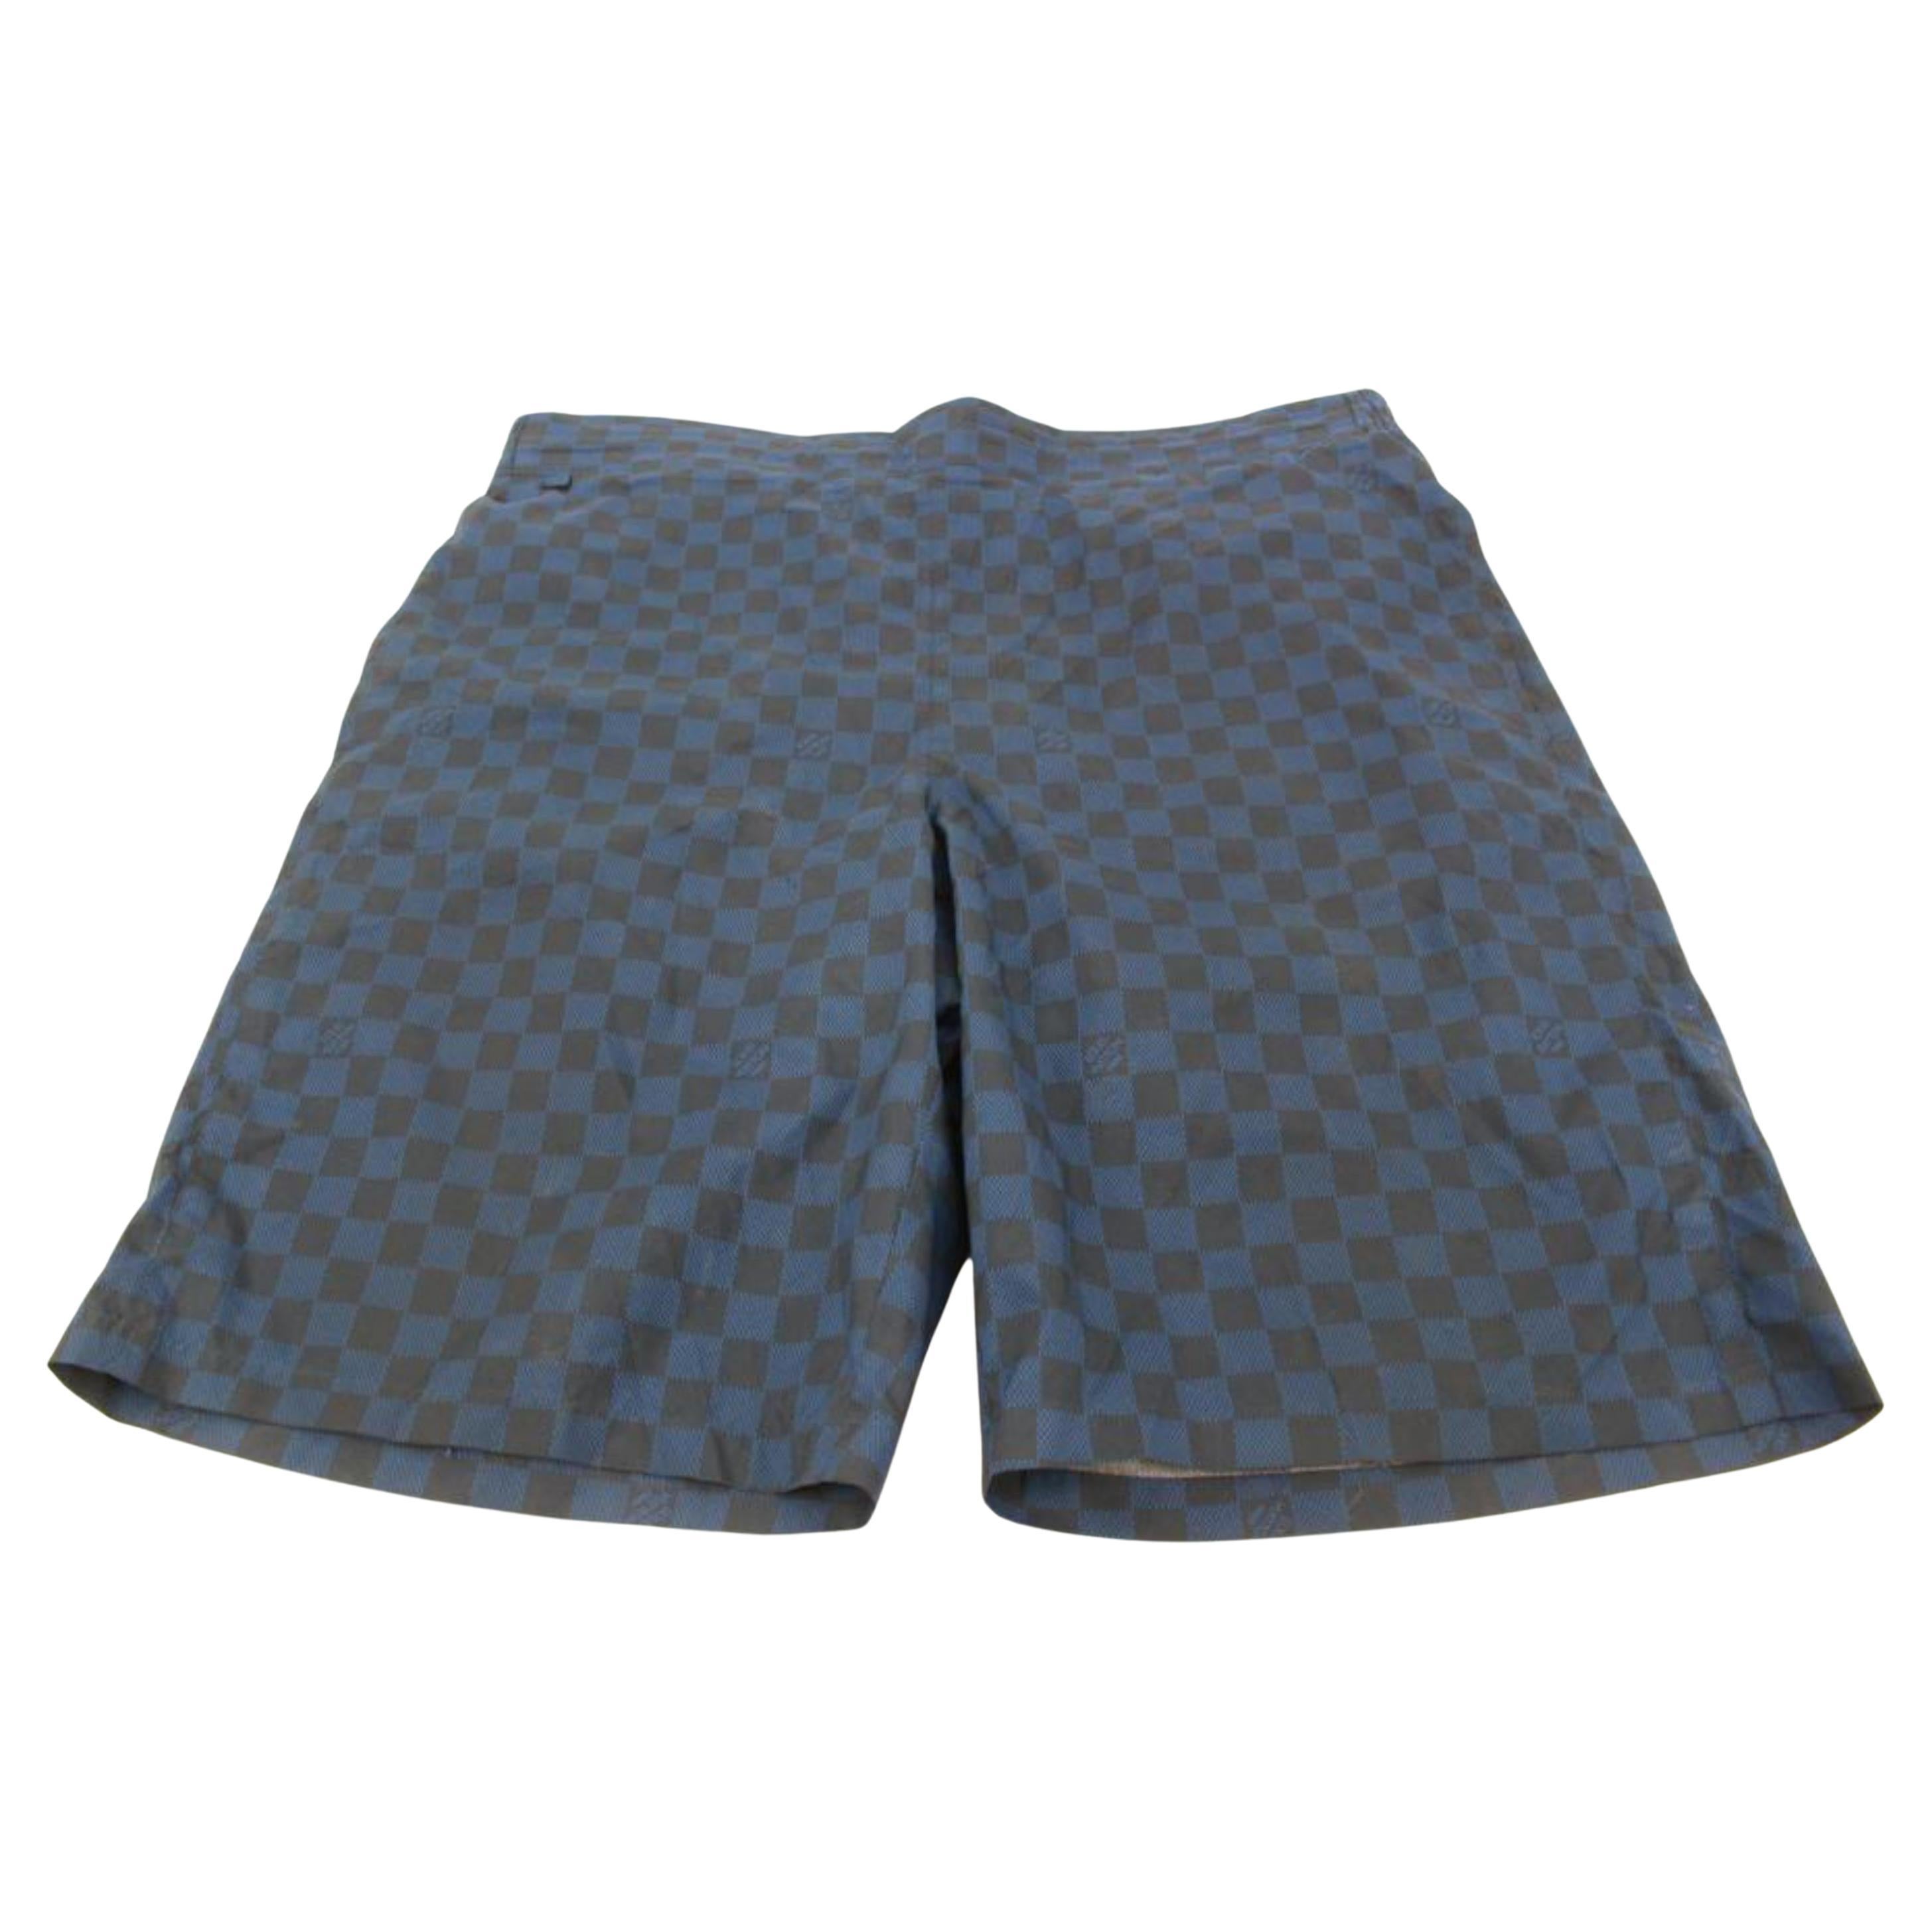 Blue Louis Vuitton Shorts - 2 For Sale on 1stDibs